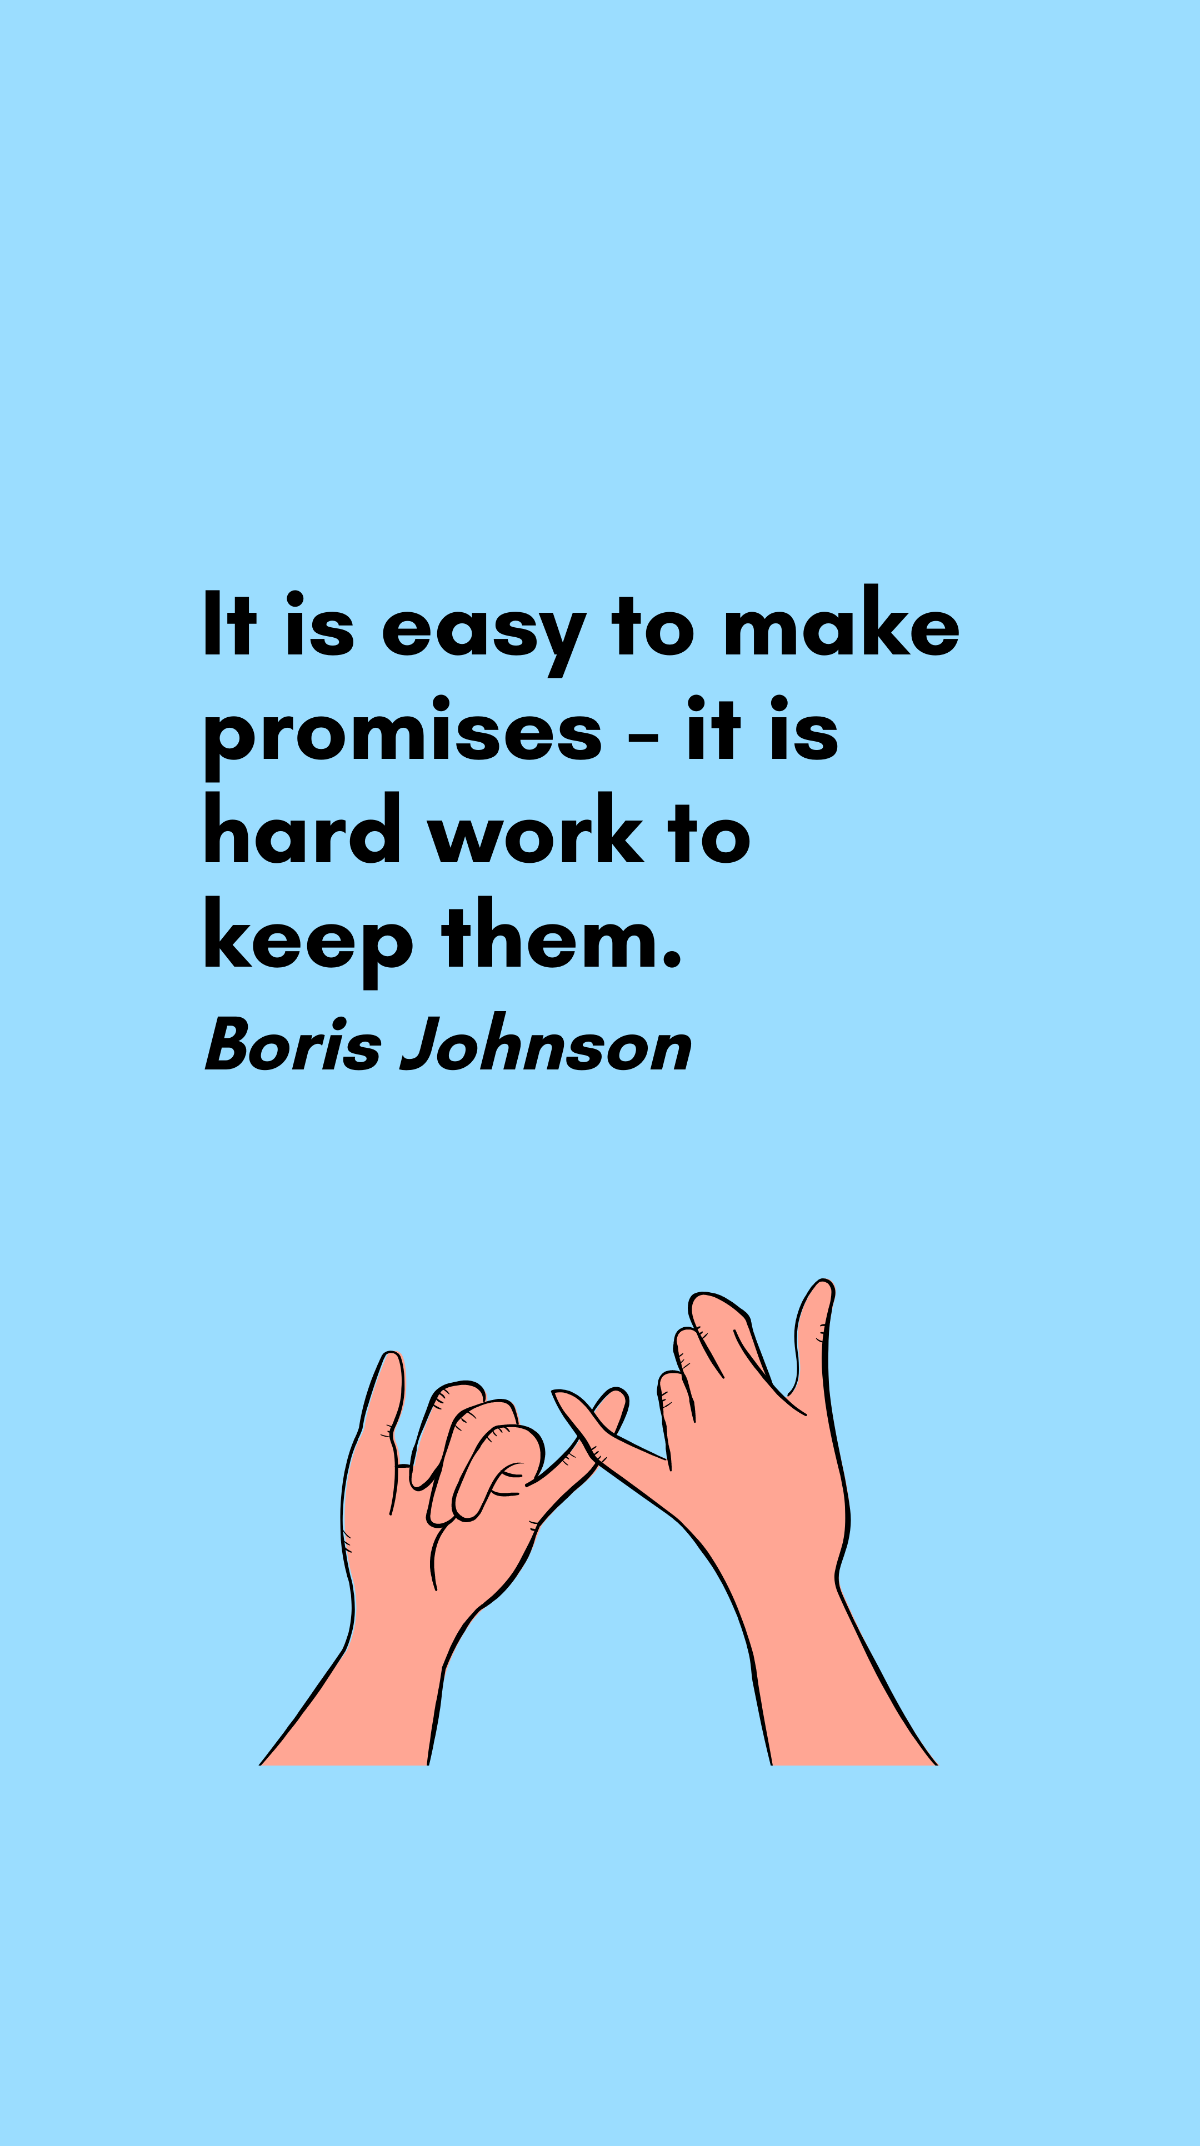 Boris Johnson - It is easy to make promises - it is hard work to keep them.